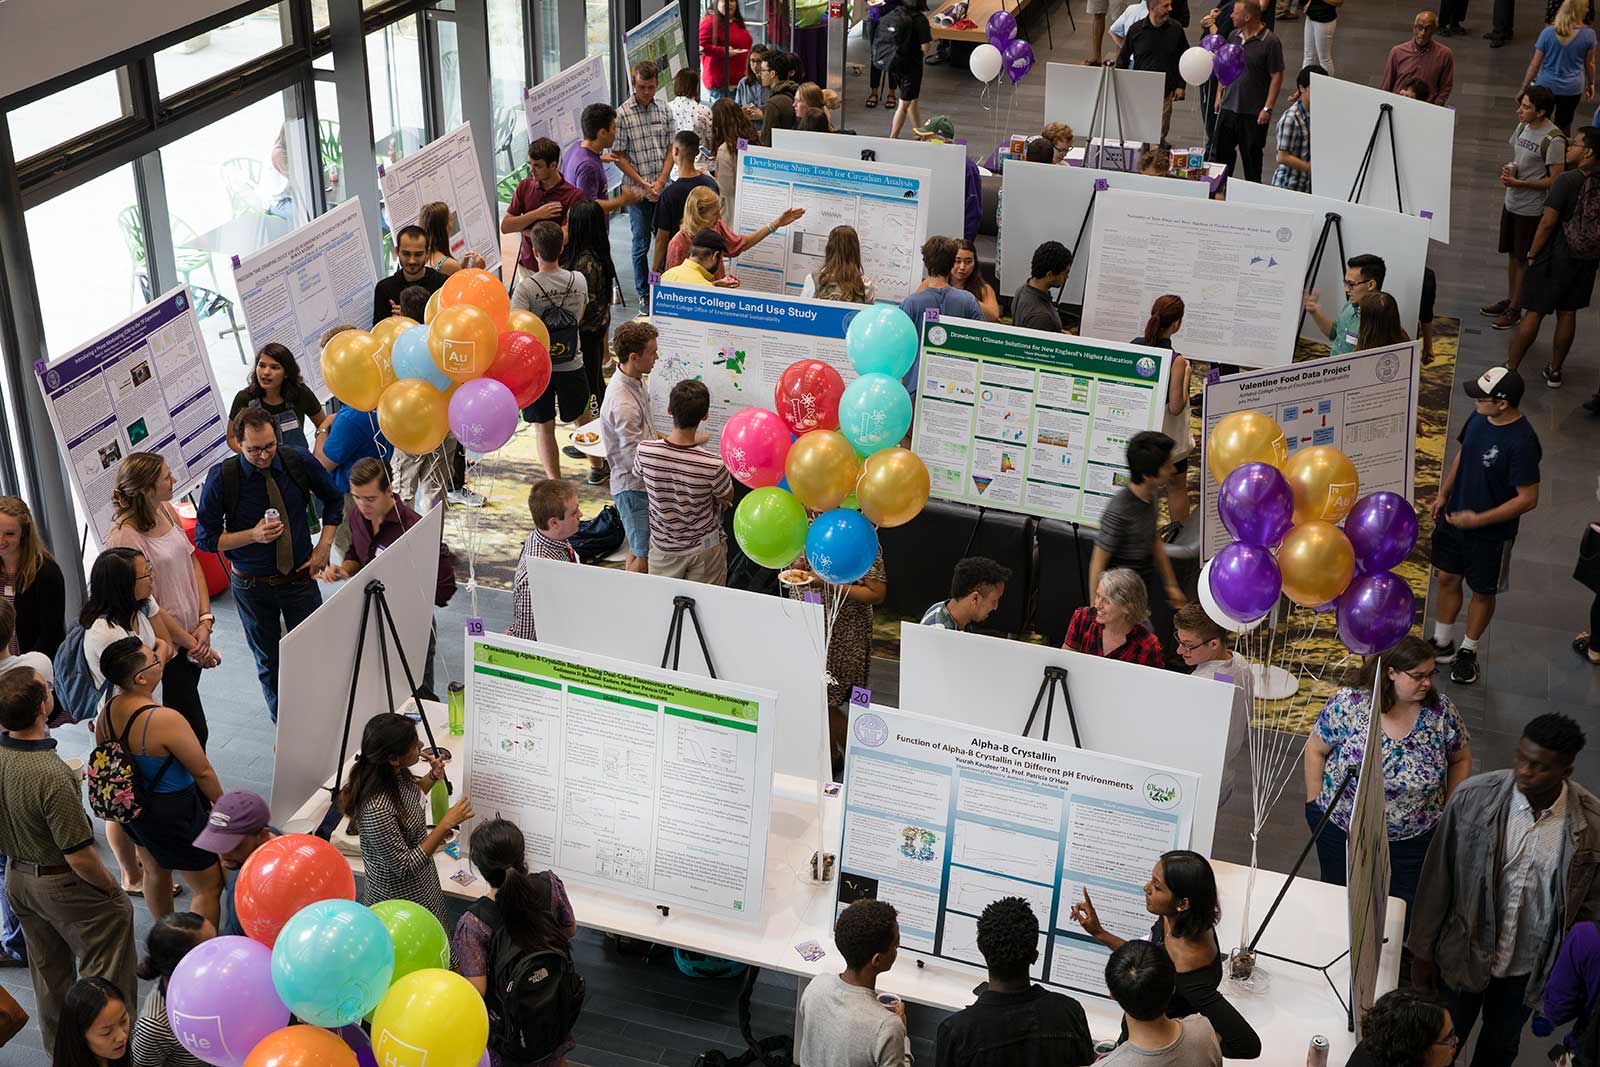 The Summer Research Poster Session in the K. Frank Austen Biology Research Collaboration Space